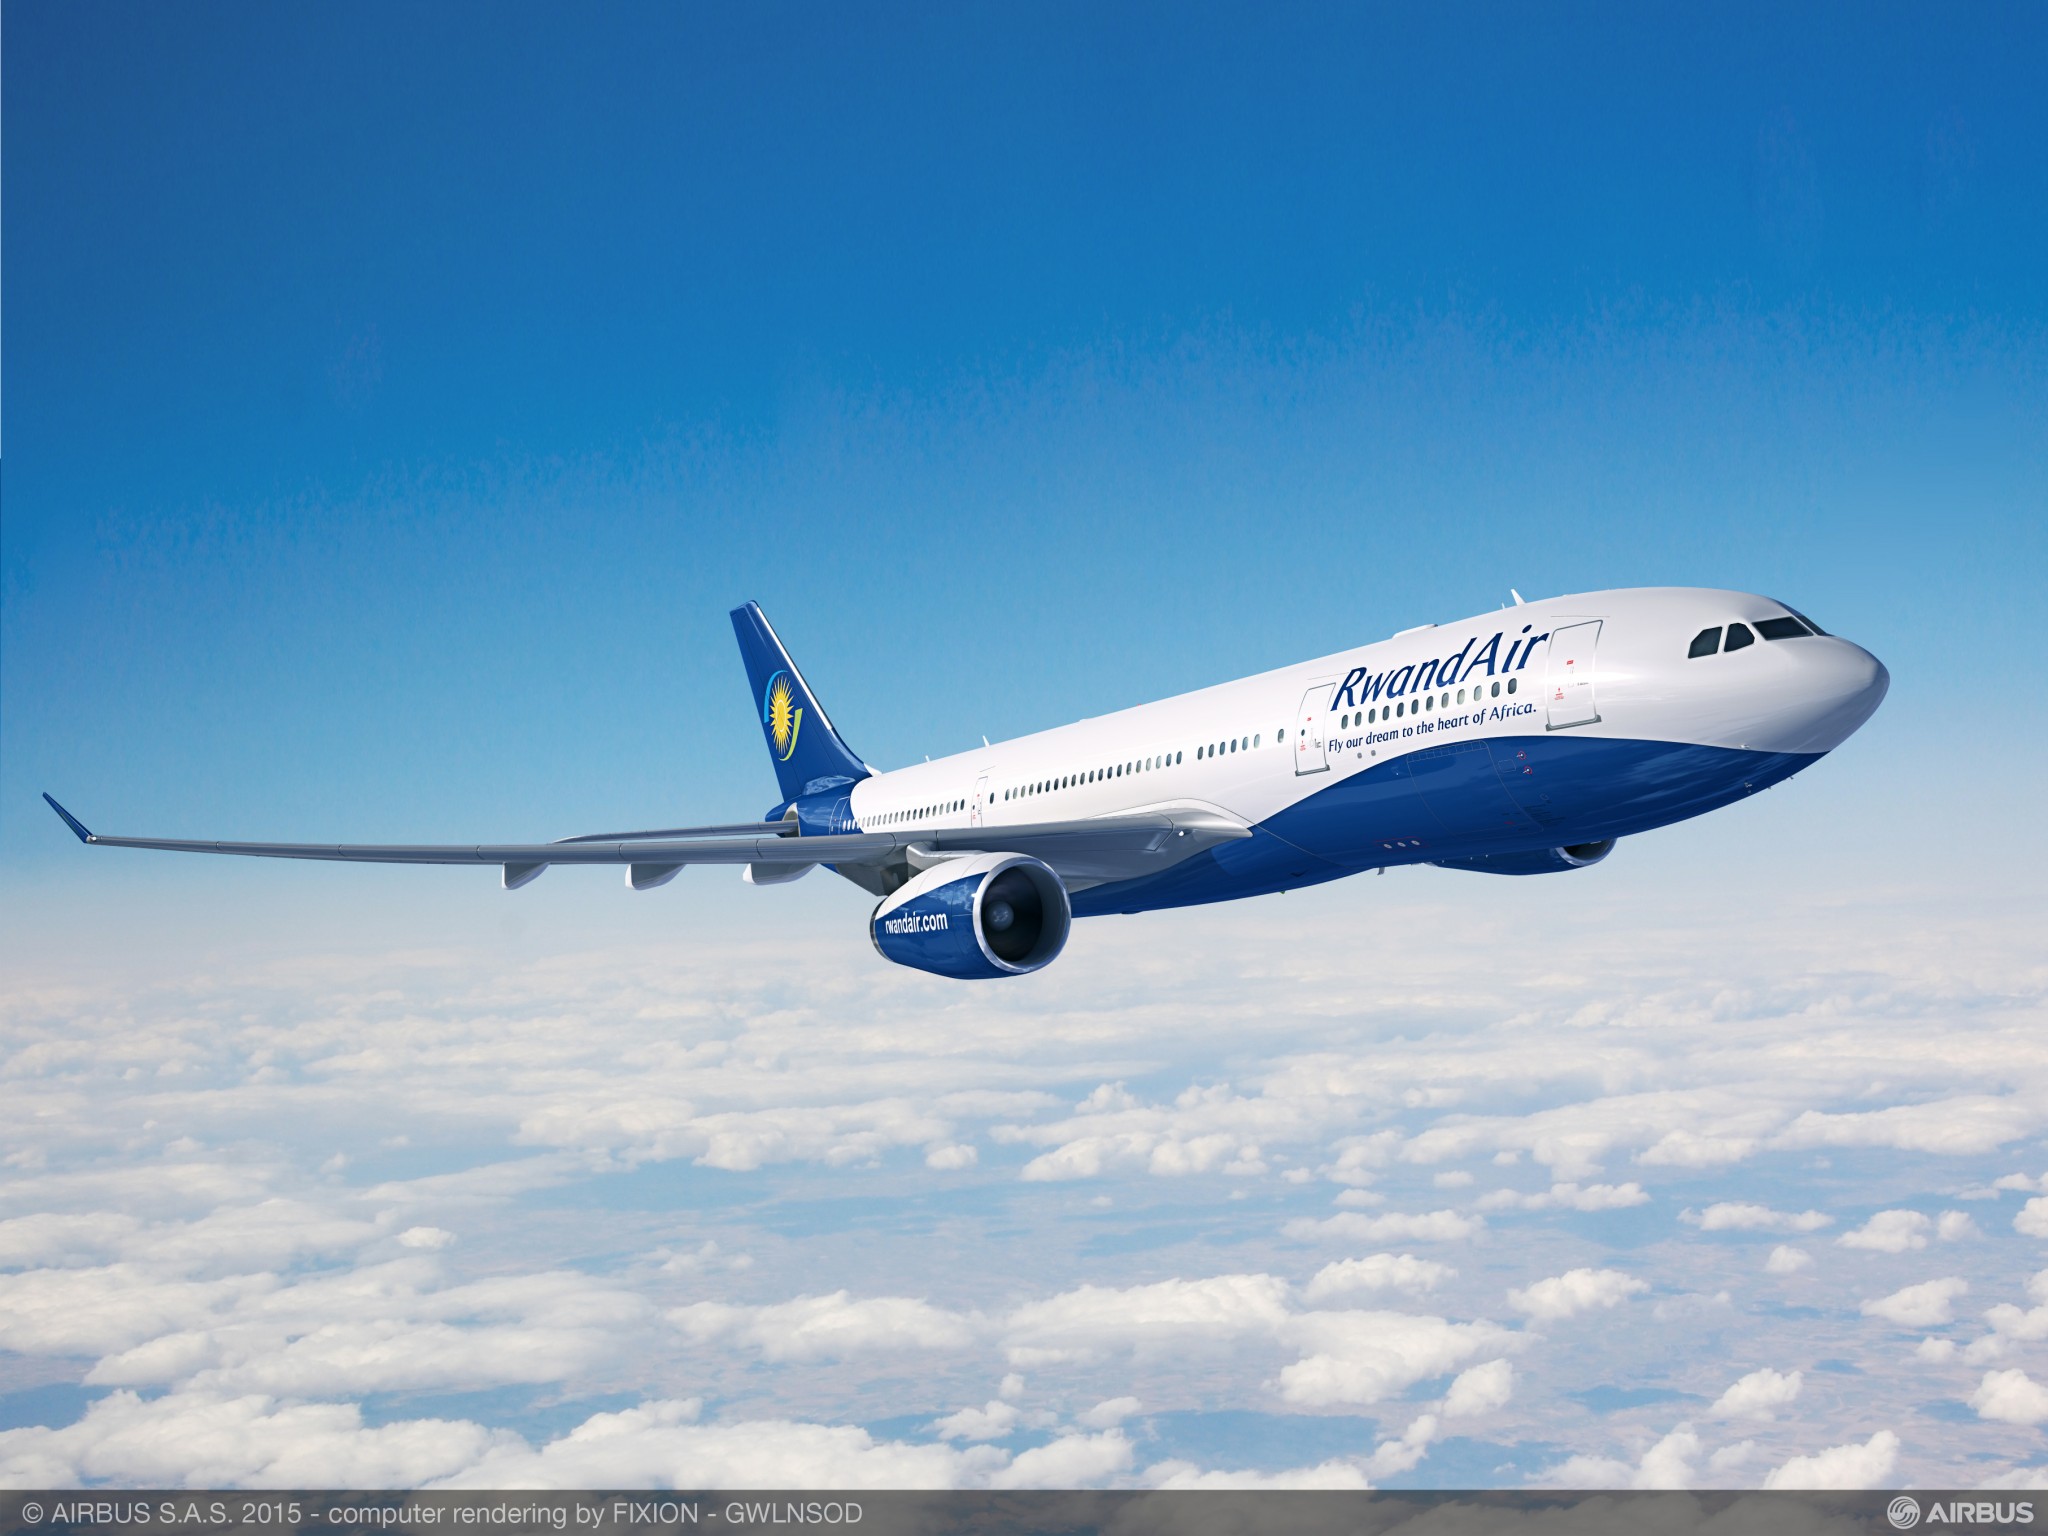 KfW IPEX-Bank in cooperation with PTA Bank finances a wide-body Airbus aircraft for RwandAir